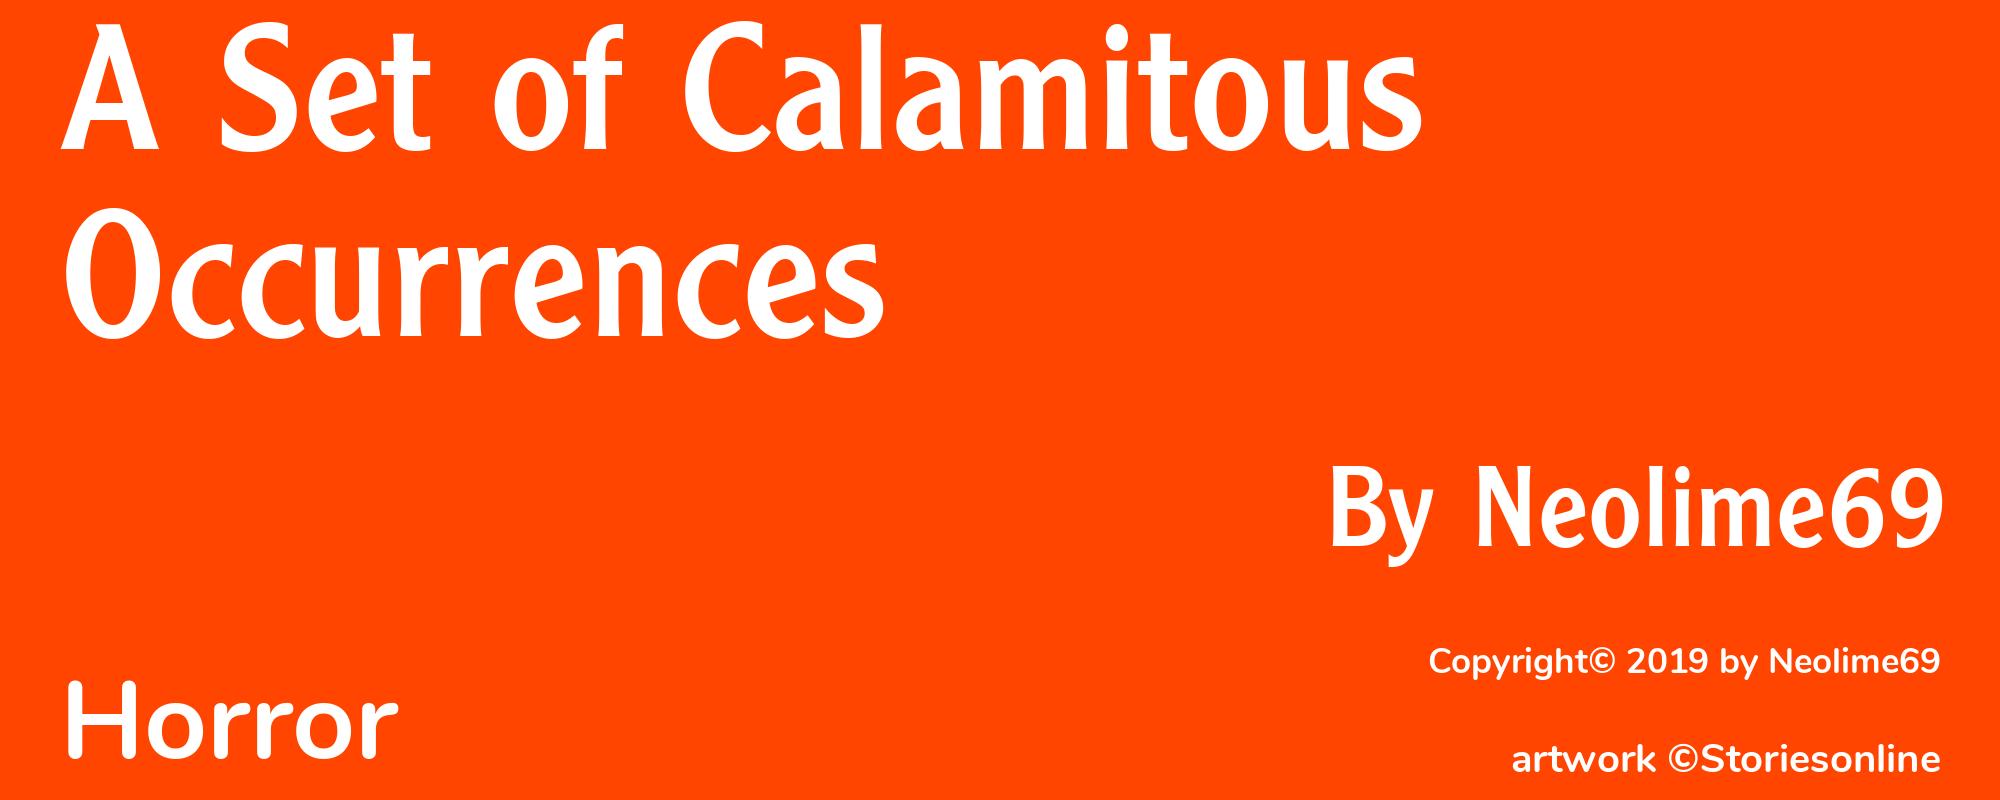 A Set of Calamitous Occurrences - Cover